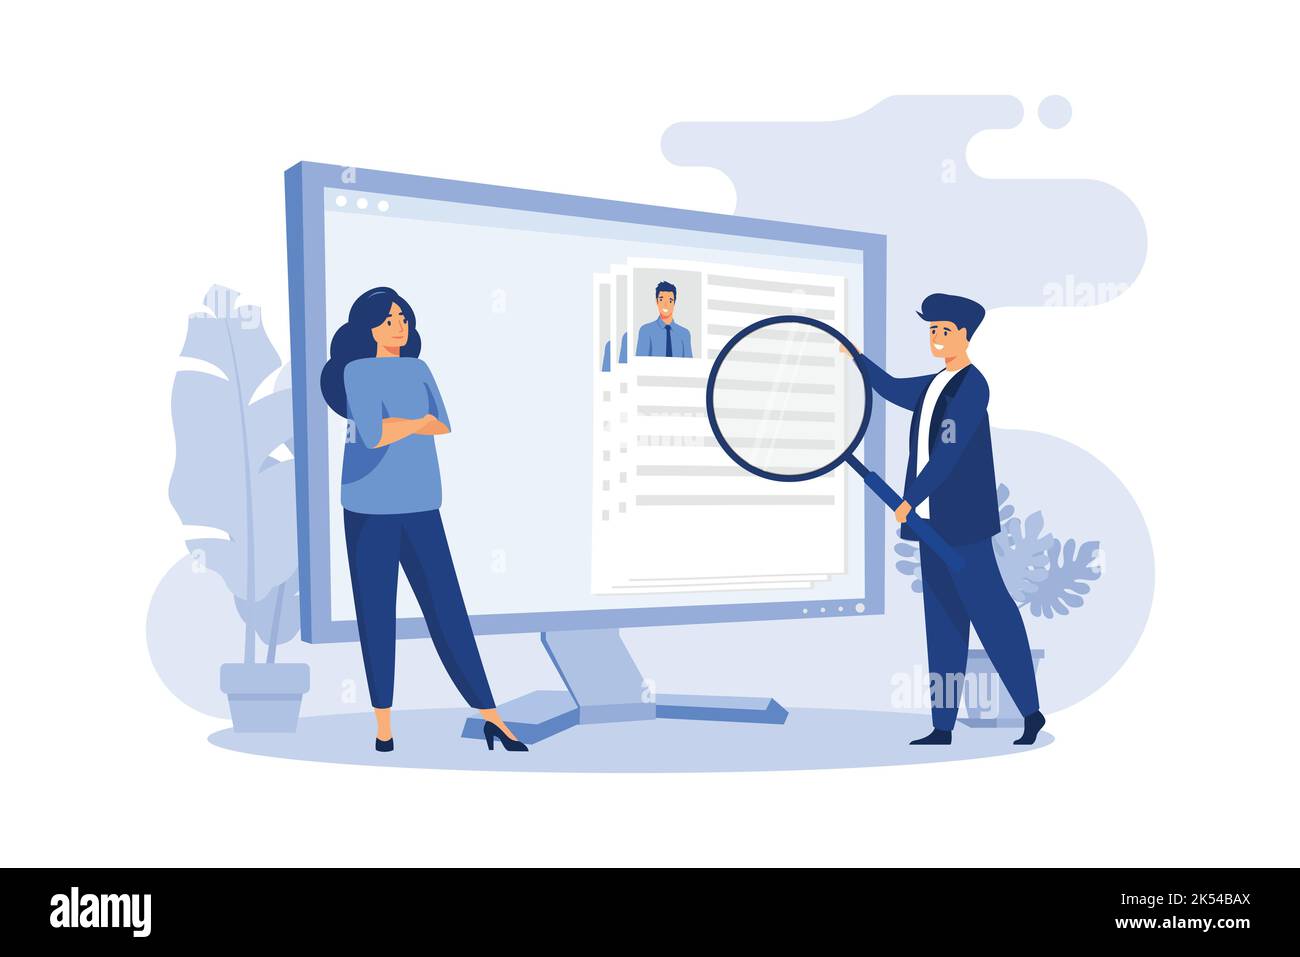 Tiny HR manager looking for candidate for job. Interview, magnifier, computer screen flat vector illustration. Career and employment concept for banne Stock Vector